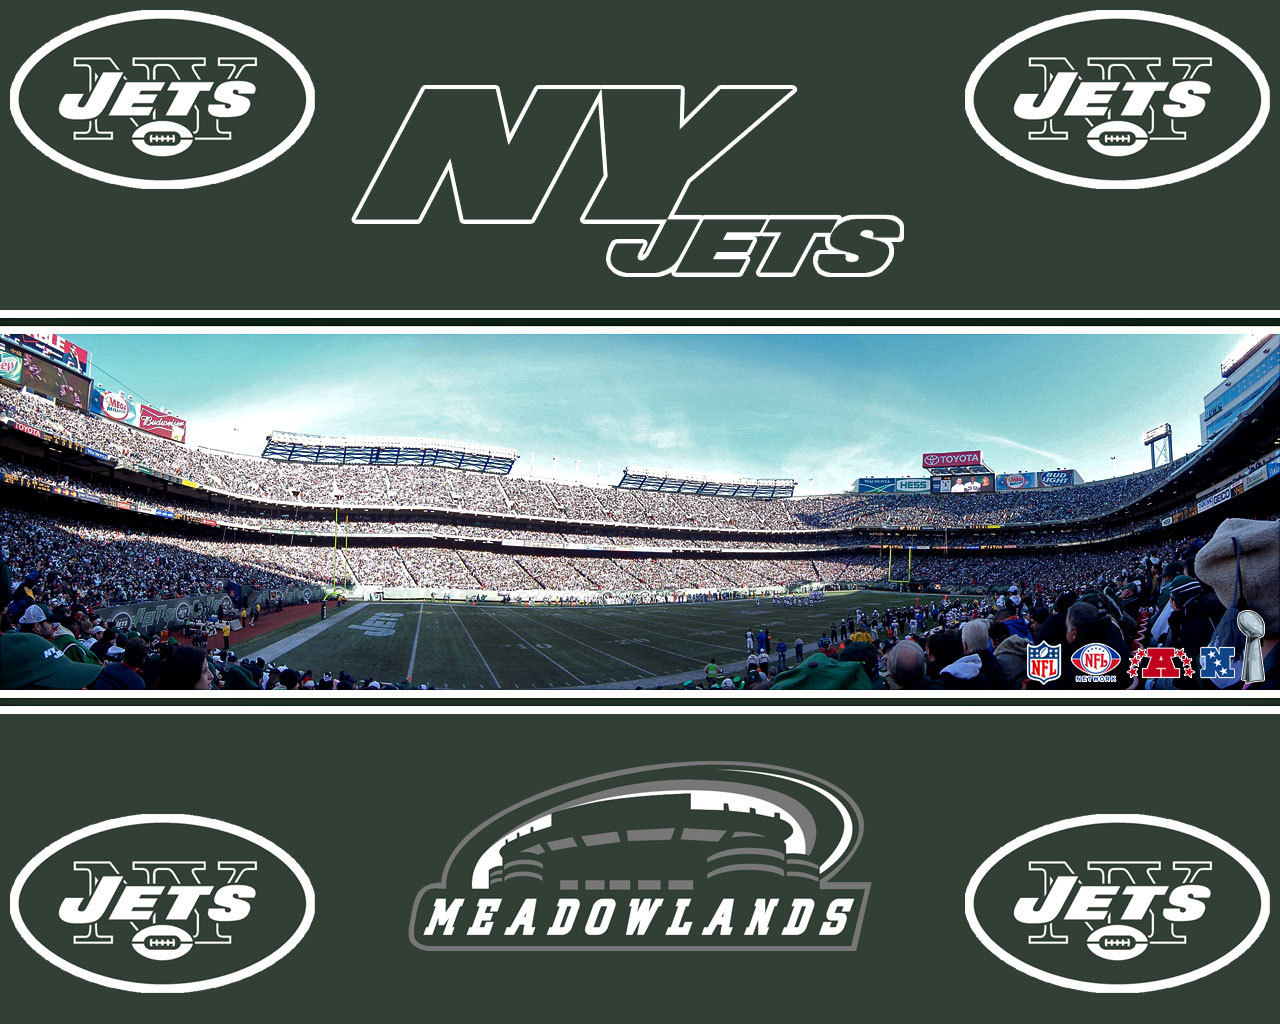 Ny Jets - Logos And Uniforms Of The New York Jets - HD Wallpaper 